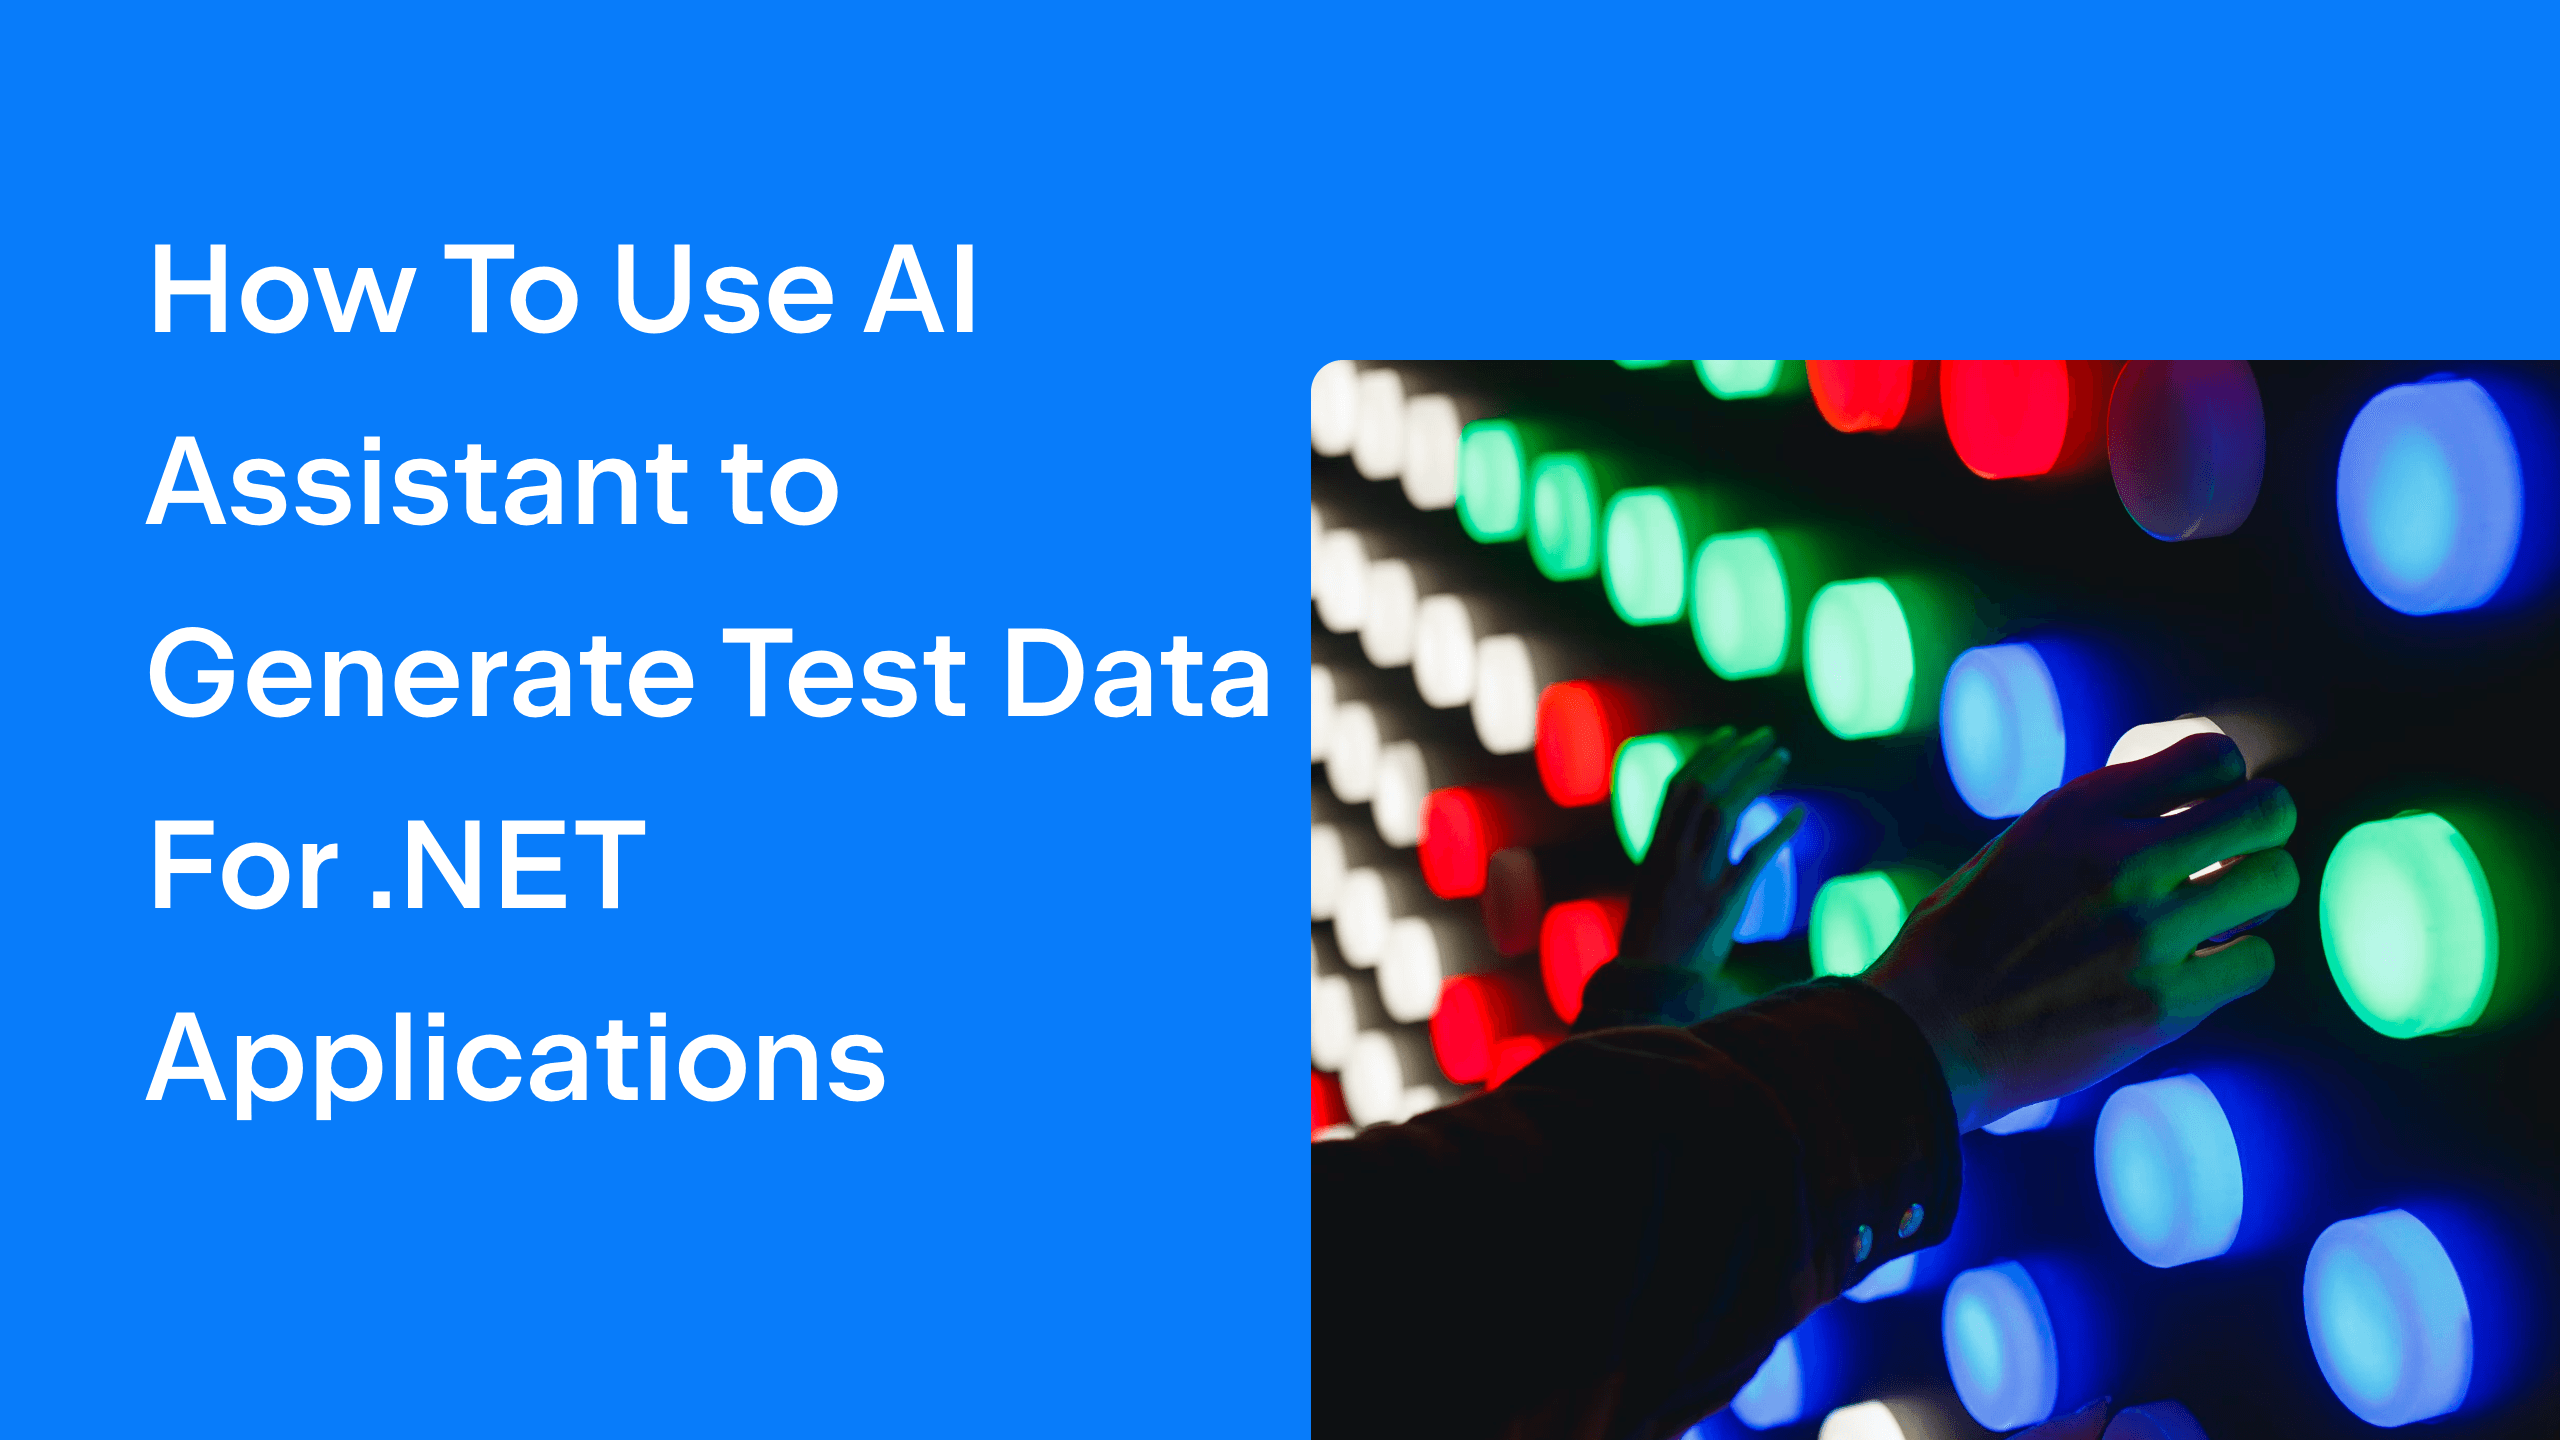 How To Use AI Assistant to Generate Test Data For .NET Applications